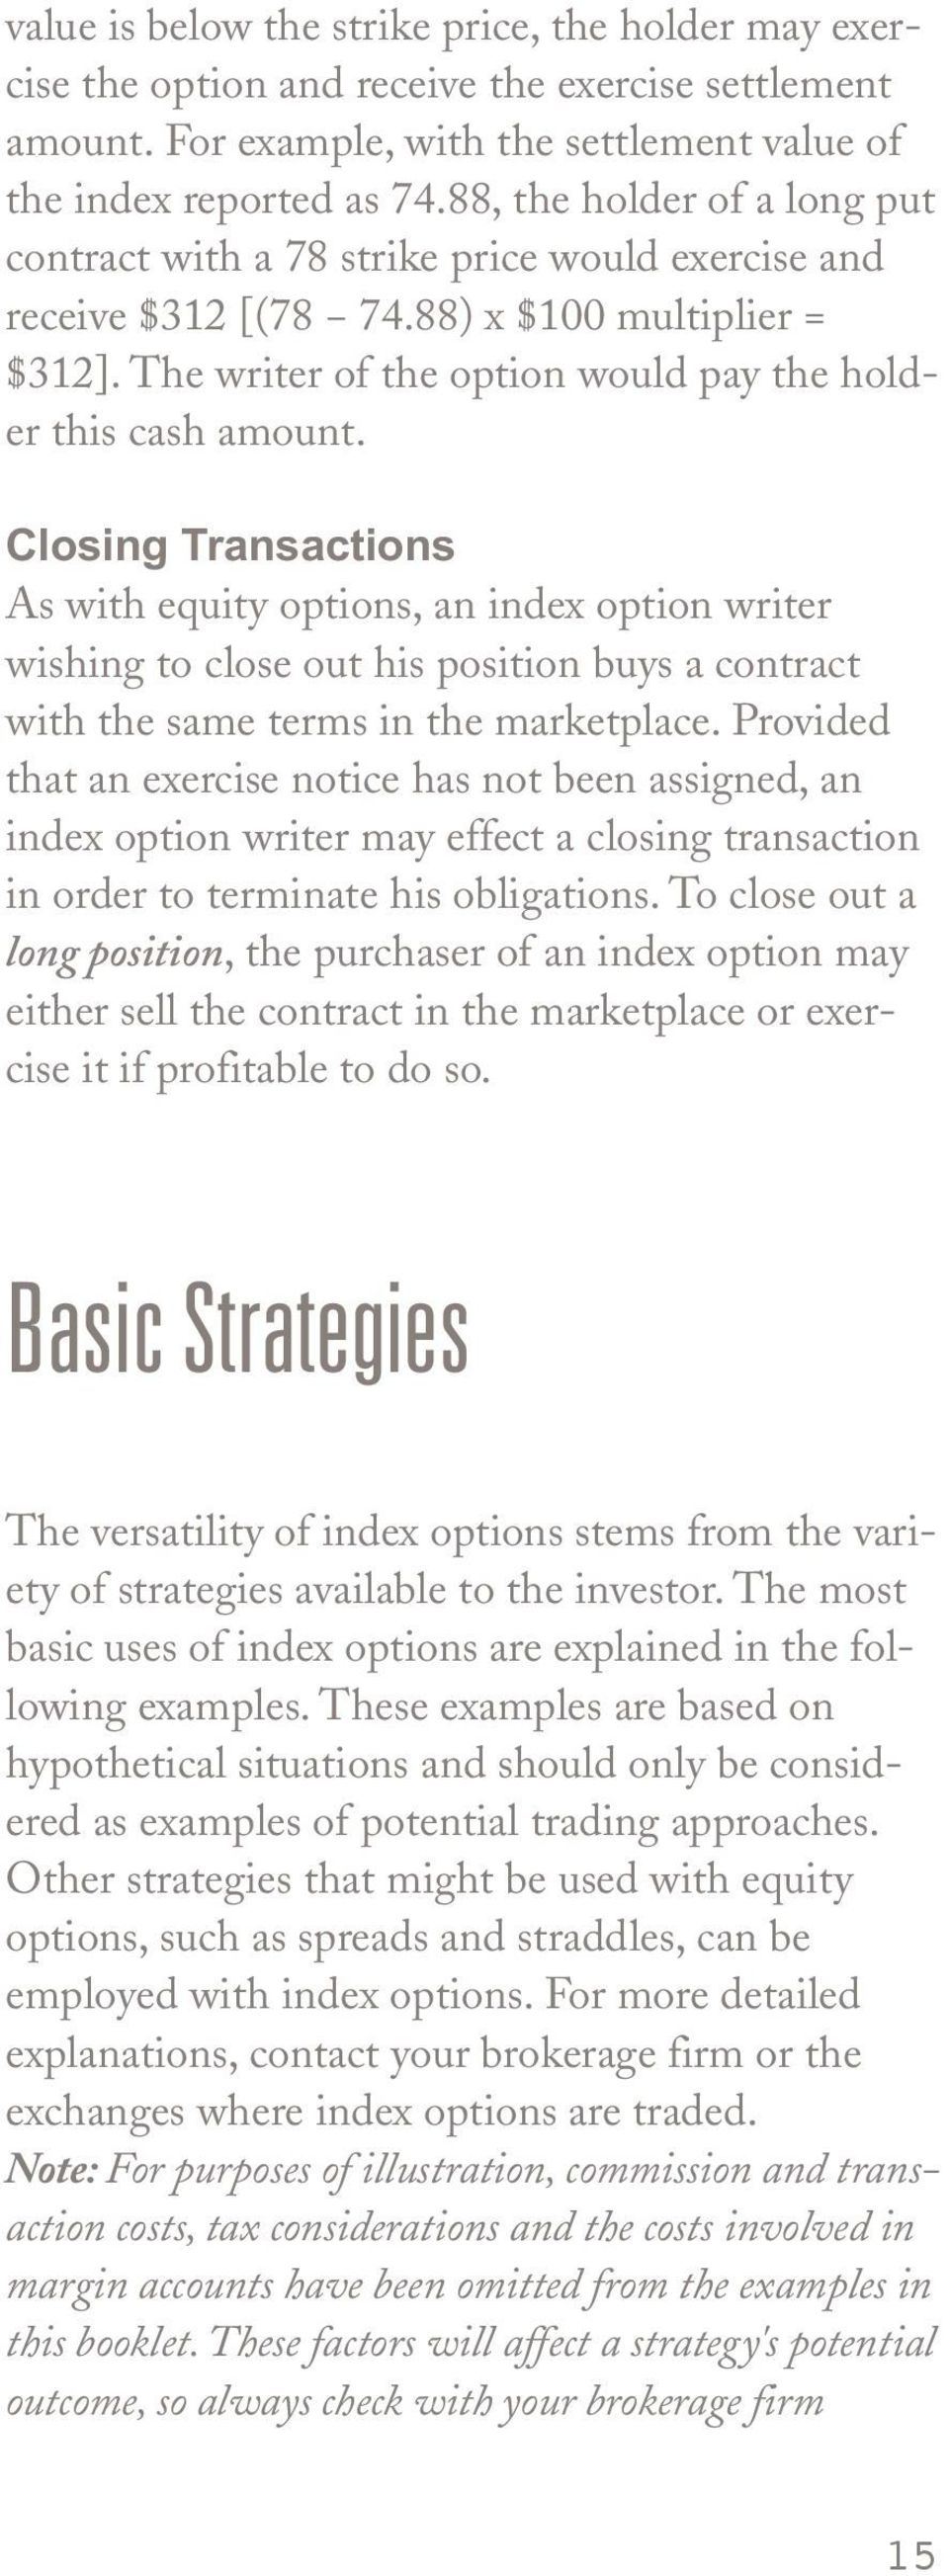 Closing Transactions As with equity options, an index option writer wishing to close out his position buys a contract with the same terms in the marketplace.